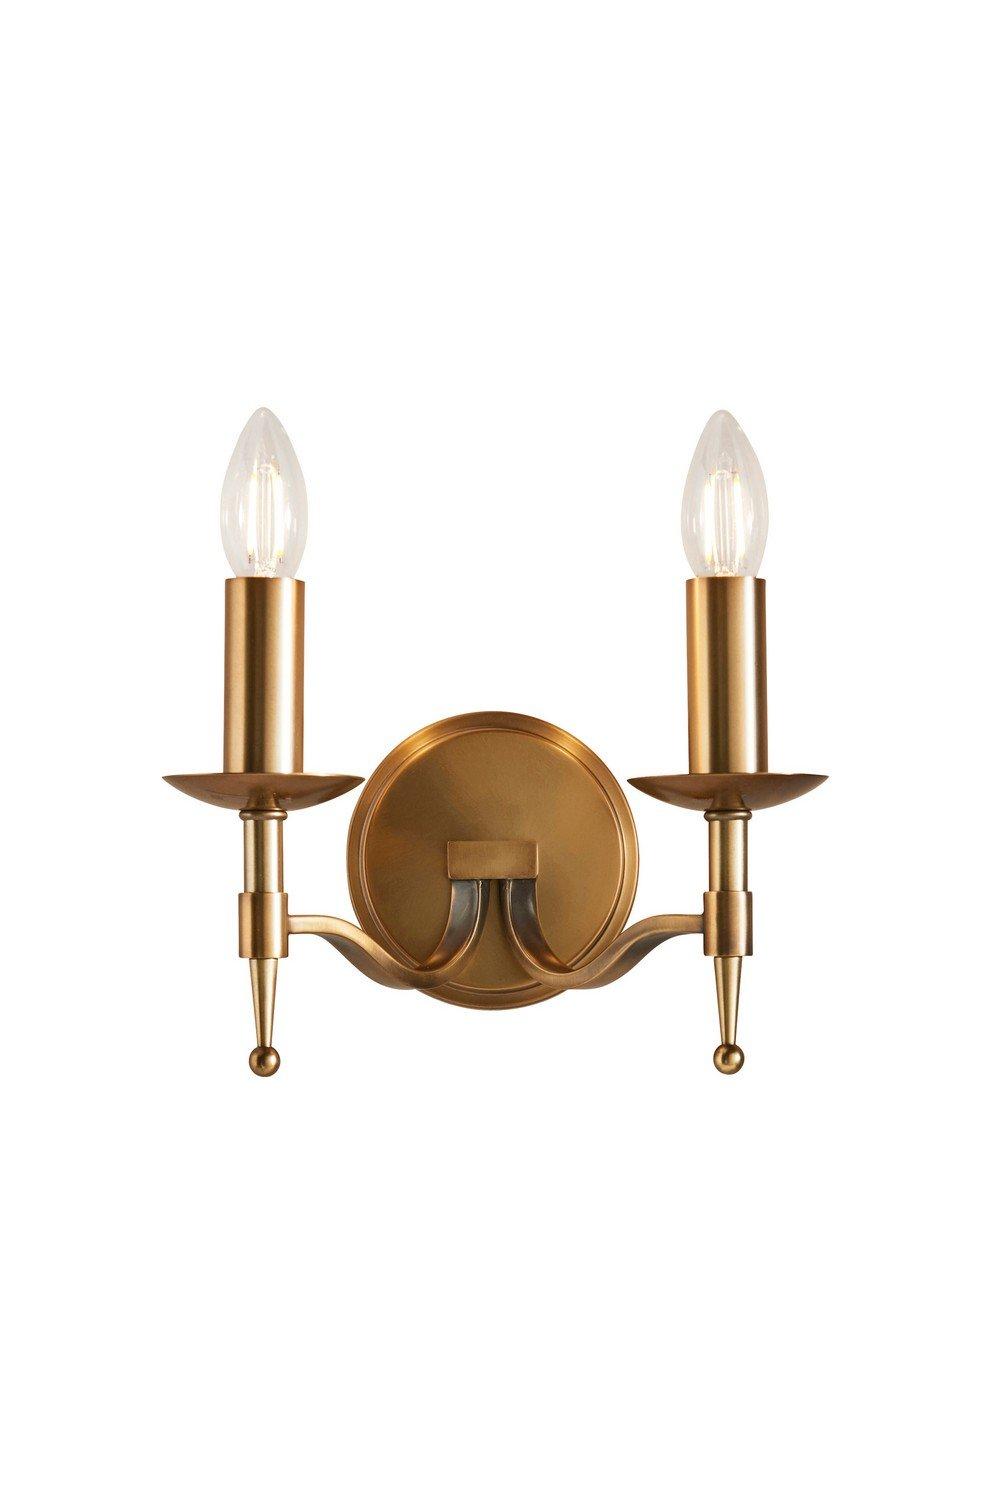 Stanford 2 Light Indoor Twin Candle Wall Light Antique Brass E14